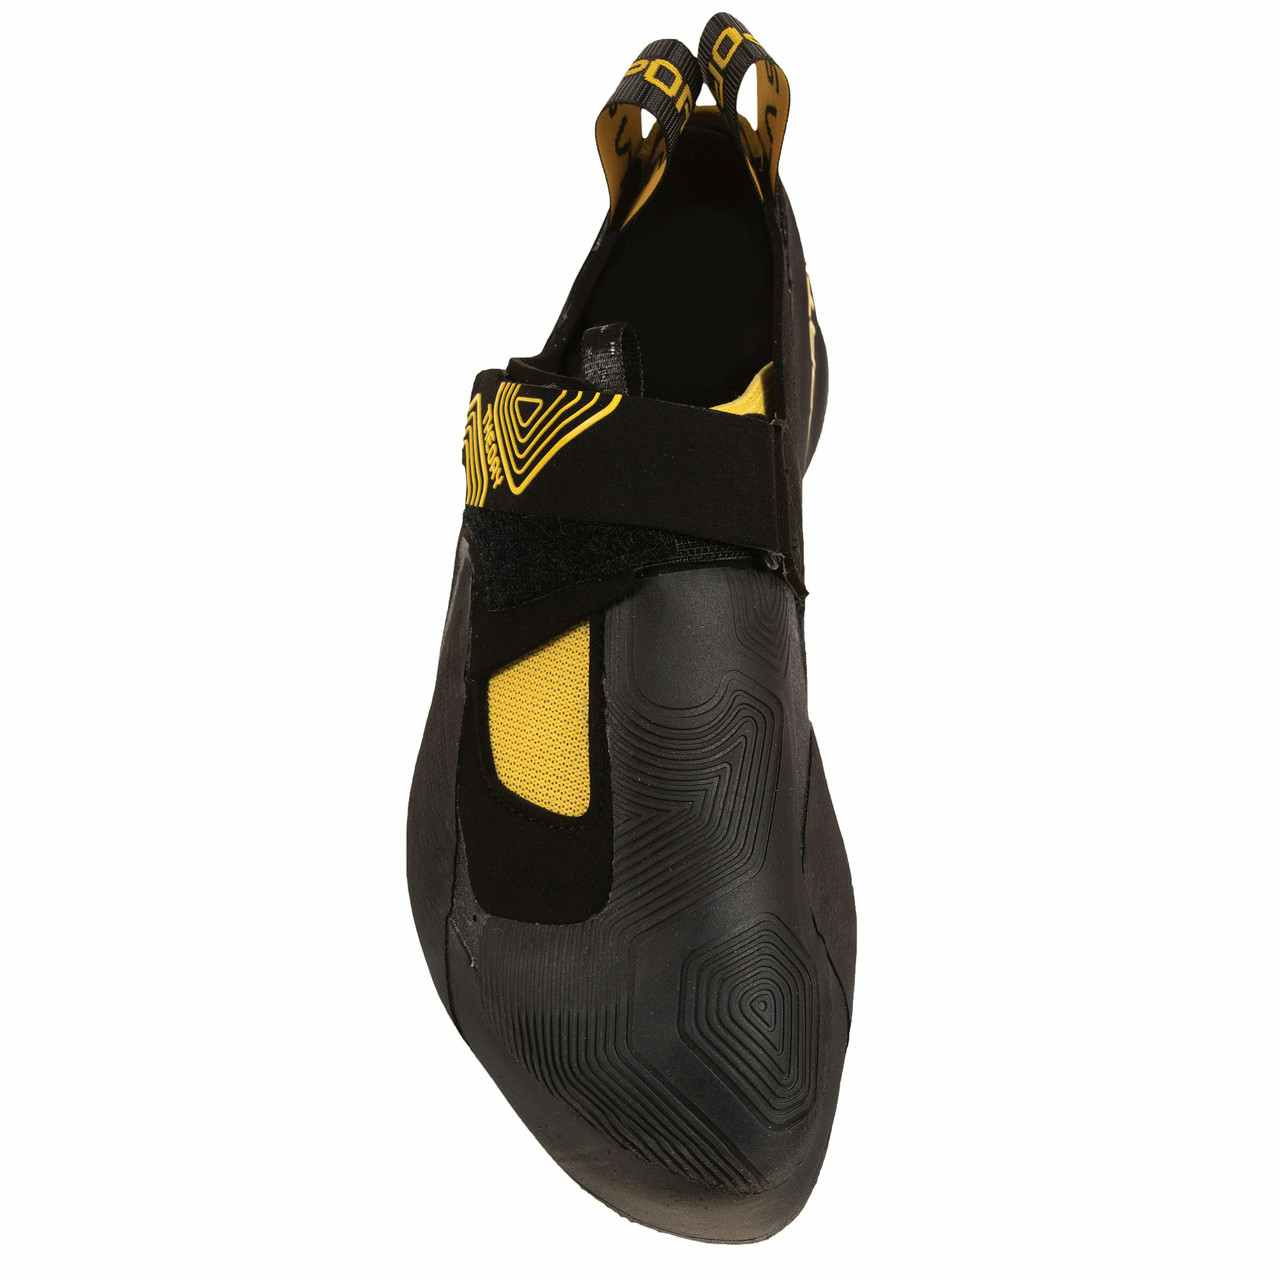 Theory Rock Shoes Black/Yellow